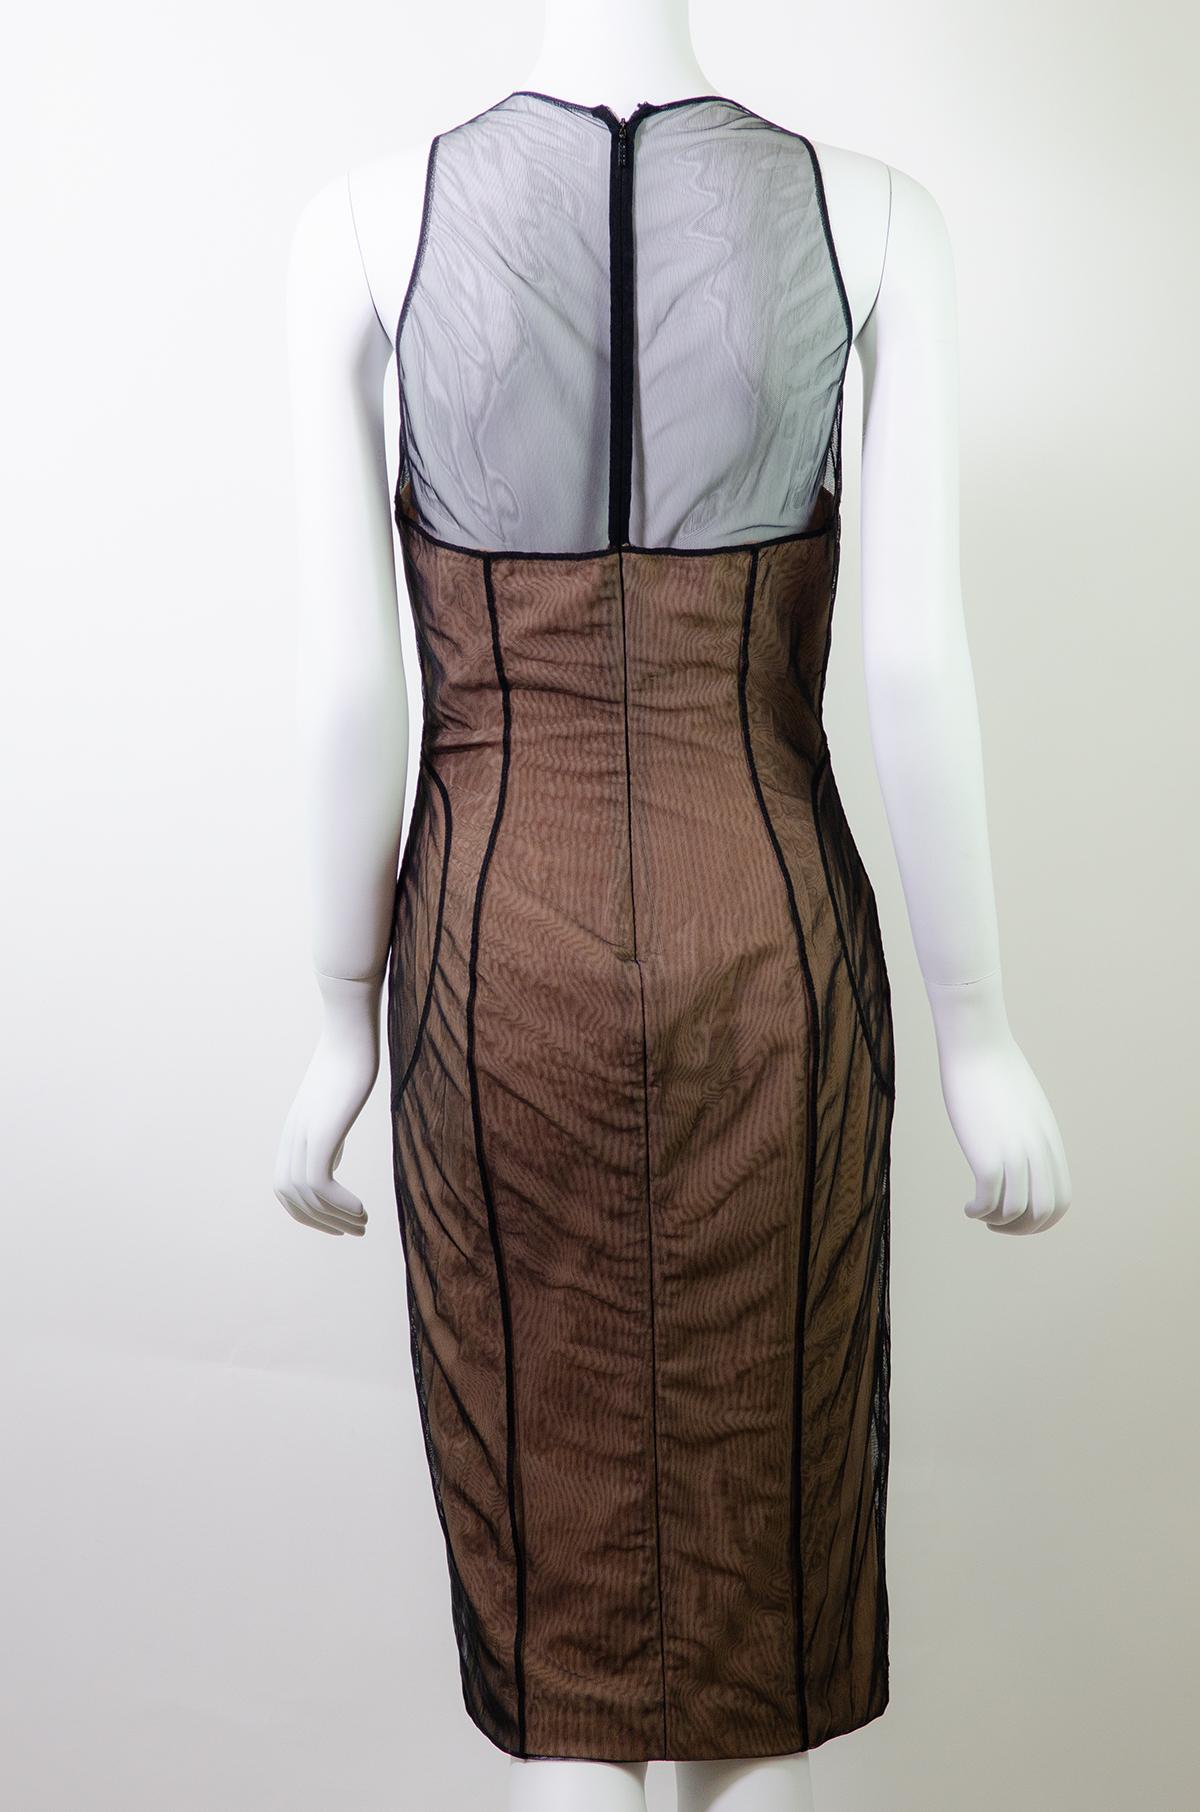 Women's GUCCI by TOM FORD S/S 2001 Mesh Corset Runway Dress New with Tags IT42 For Sale